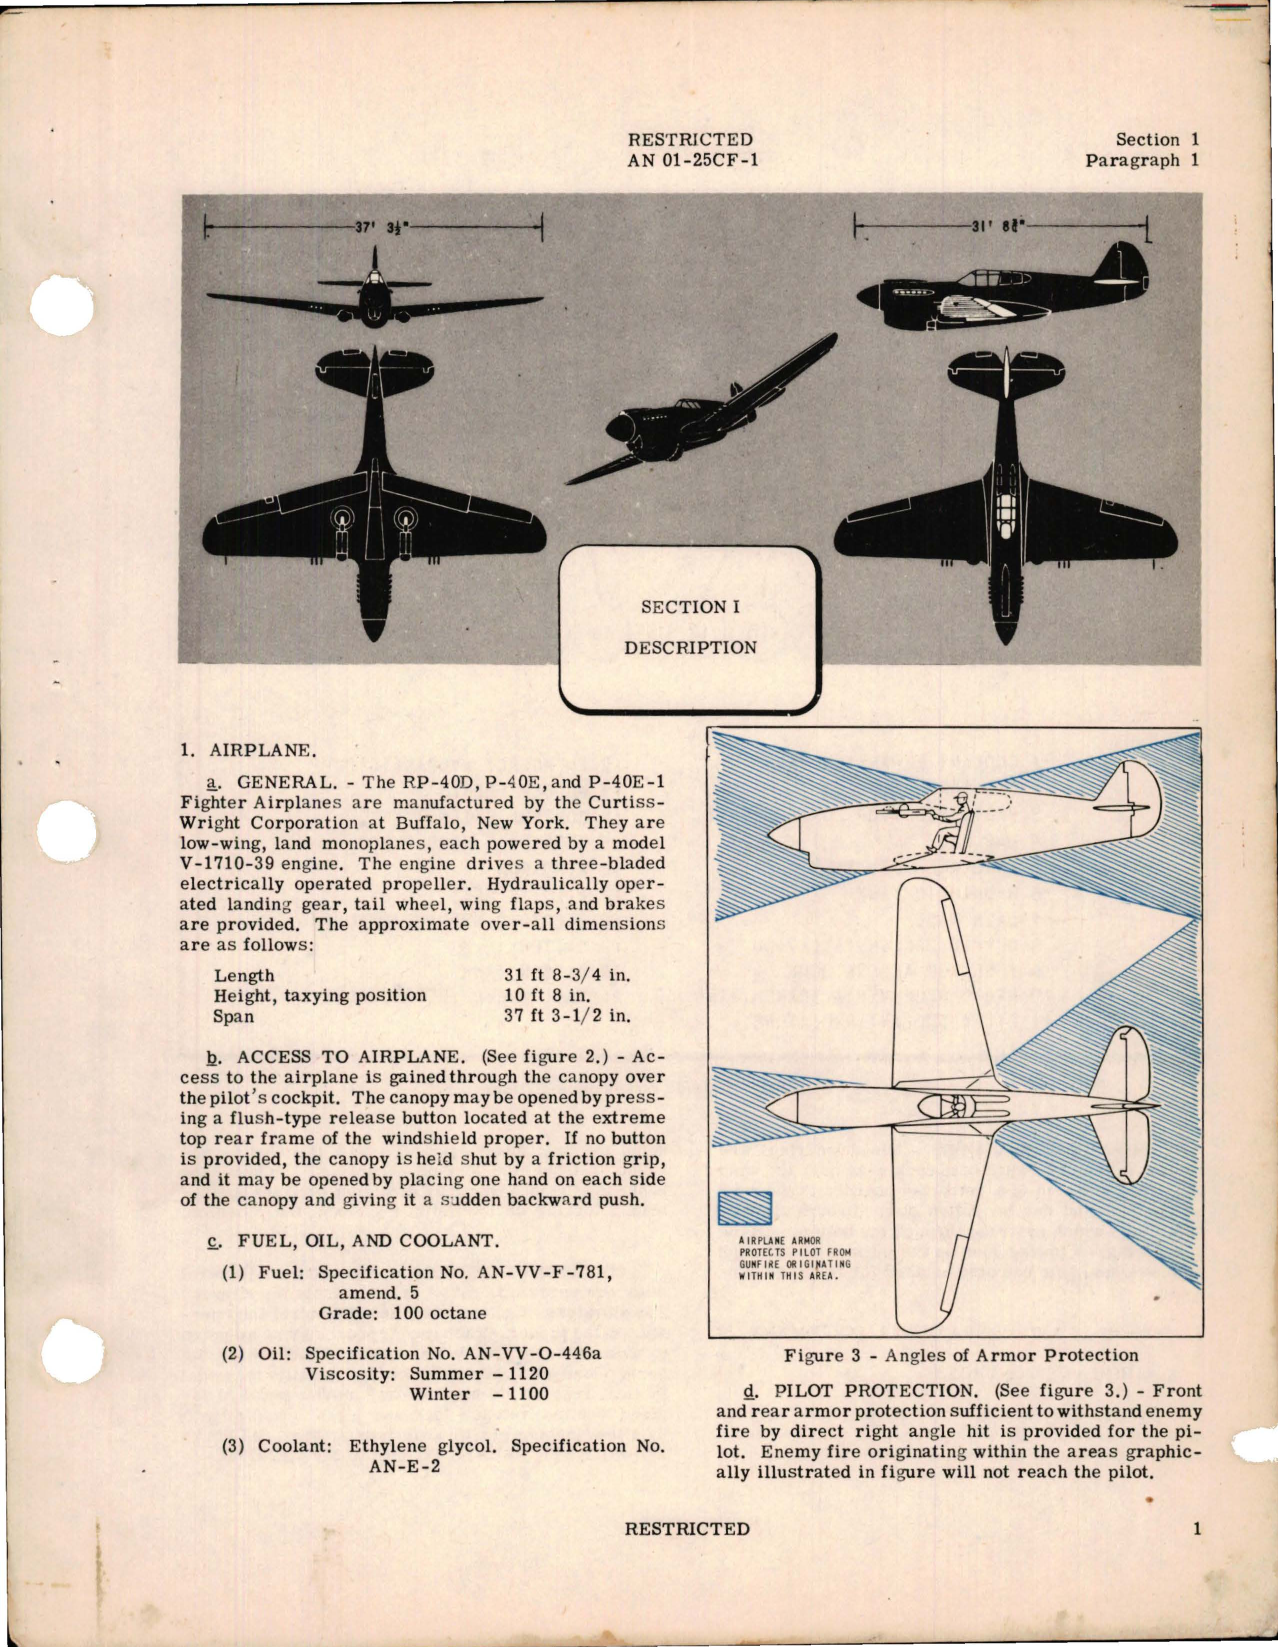 Sample page 7 from AirCorps Library document: Pilot's Flight Operating Instructions for P-40D, P-40E, P-40E-1, Kittyhawk I, and Kittyhawk IA